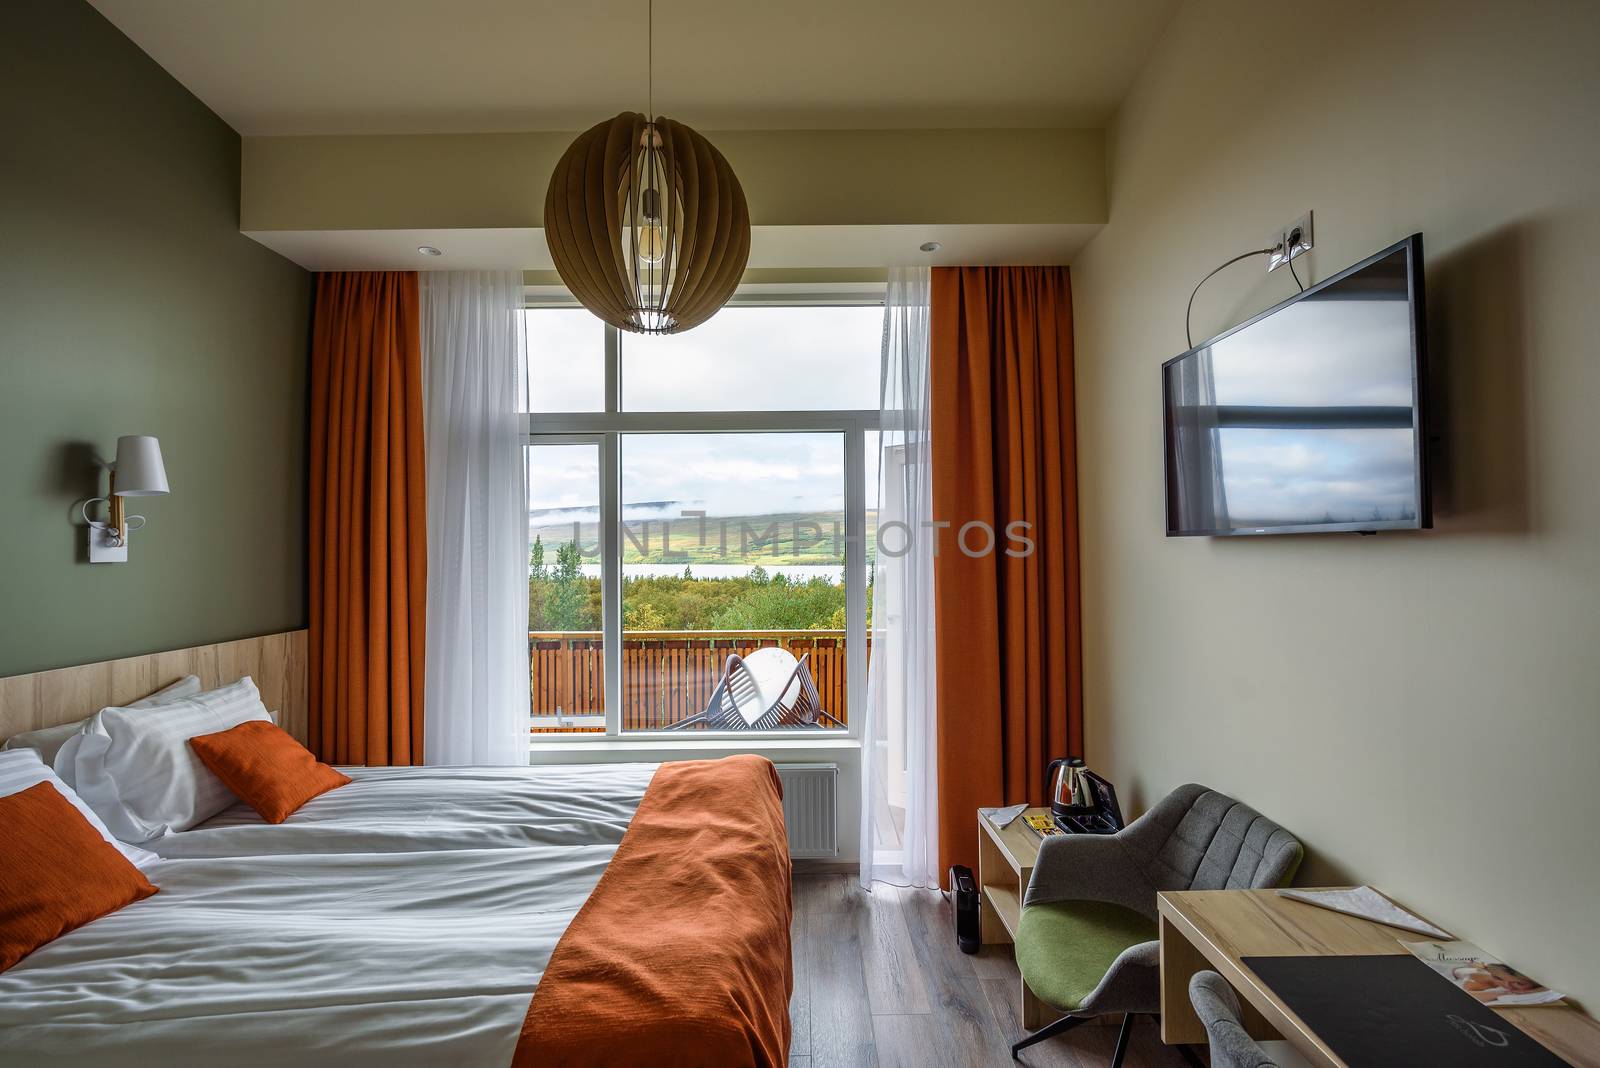 Hofn, Iceland - September 12, 2019 : Interior of a room in Fosshotel Vatnajokull, a three-star hotel in Hofn with views of the Vatnajokull glacier and located on the Ring Road in Iceland.